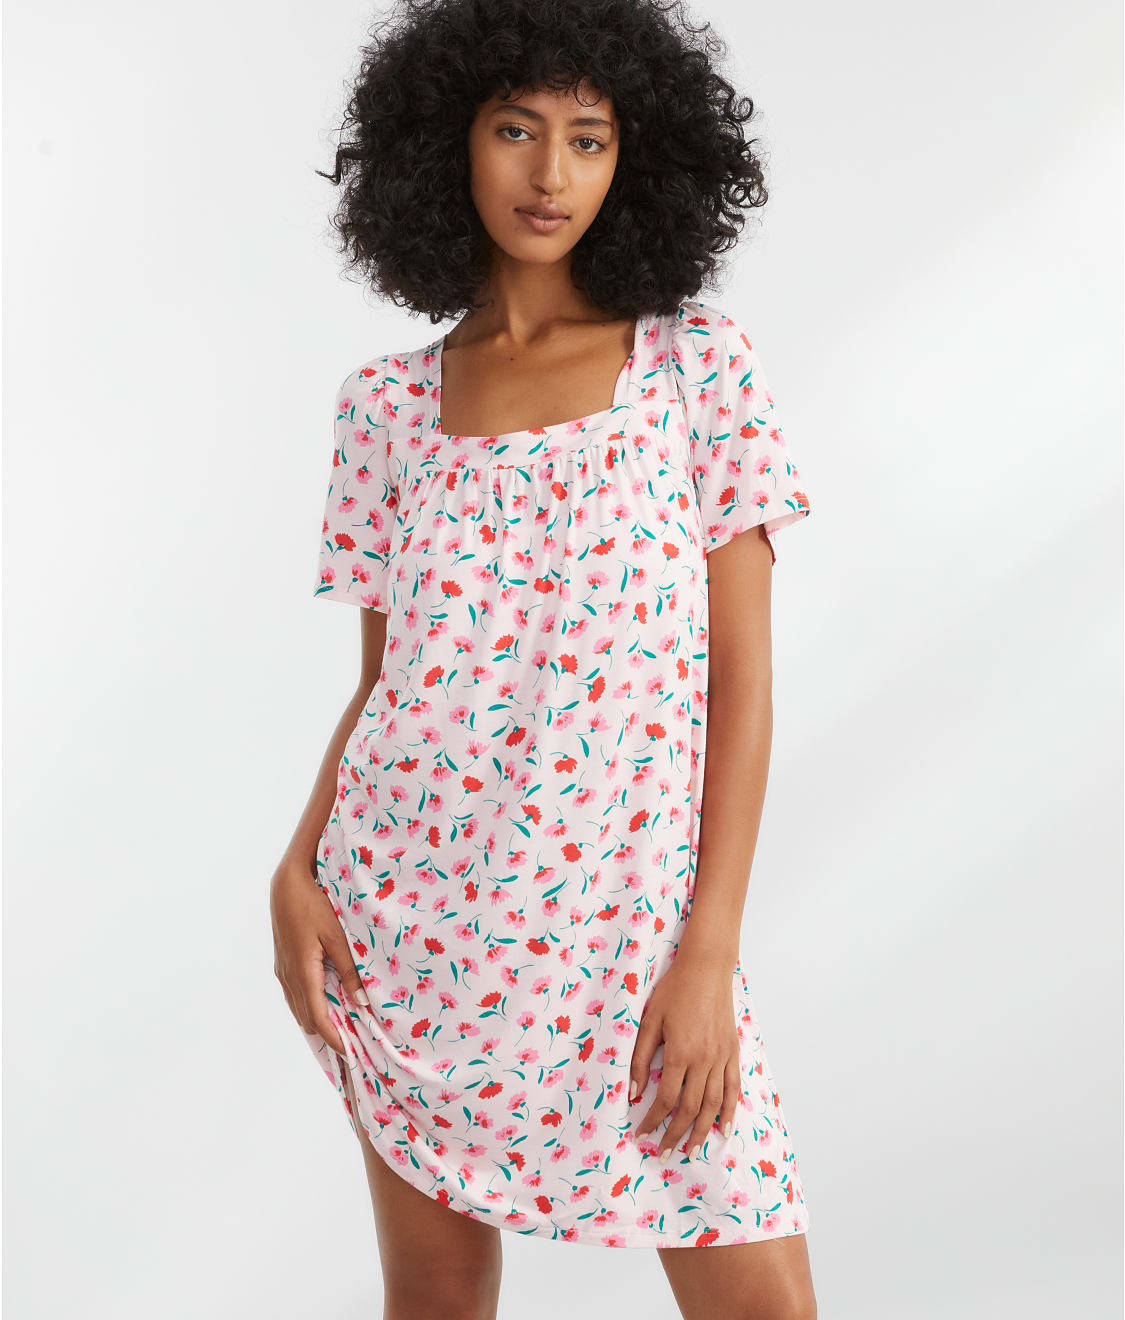 kate spade new york Floral Breeze Modal Knit Nightgown & Reviews | Bare  Necessities (Style KS32401)